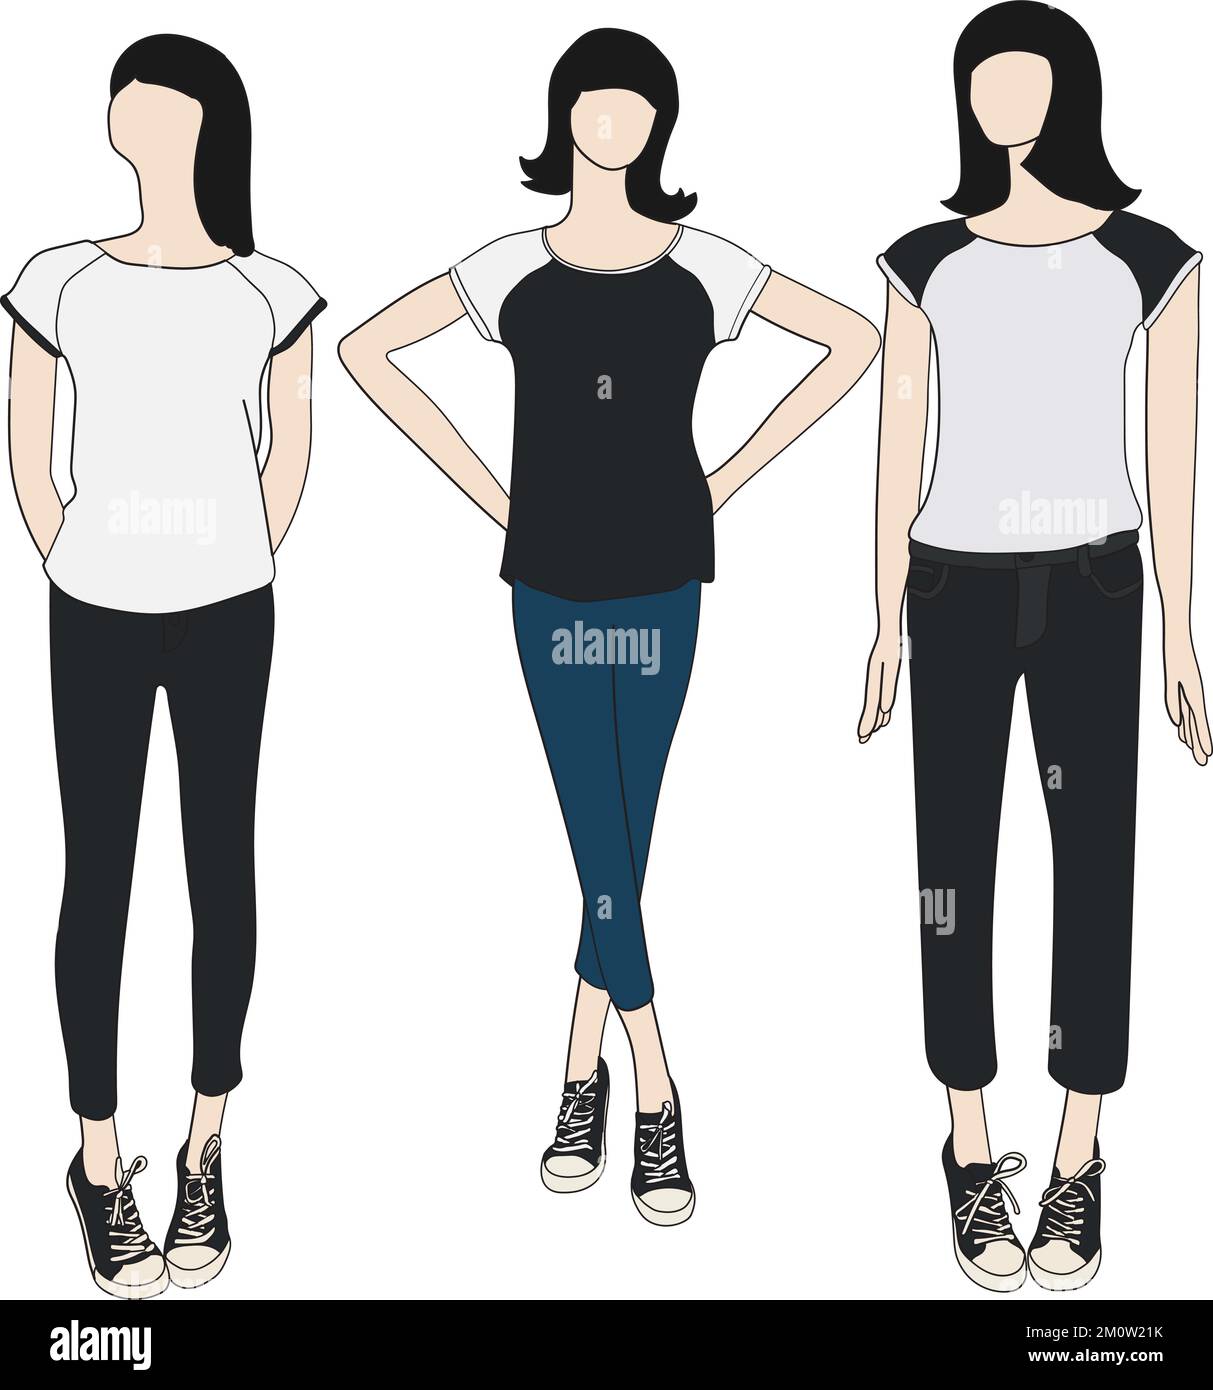 Girls mannequin wearing skinny jeans and t-shirts flat illustration Stock Vector